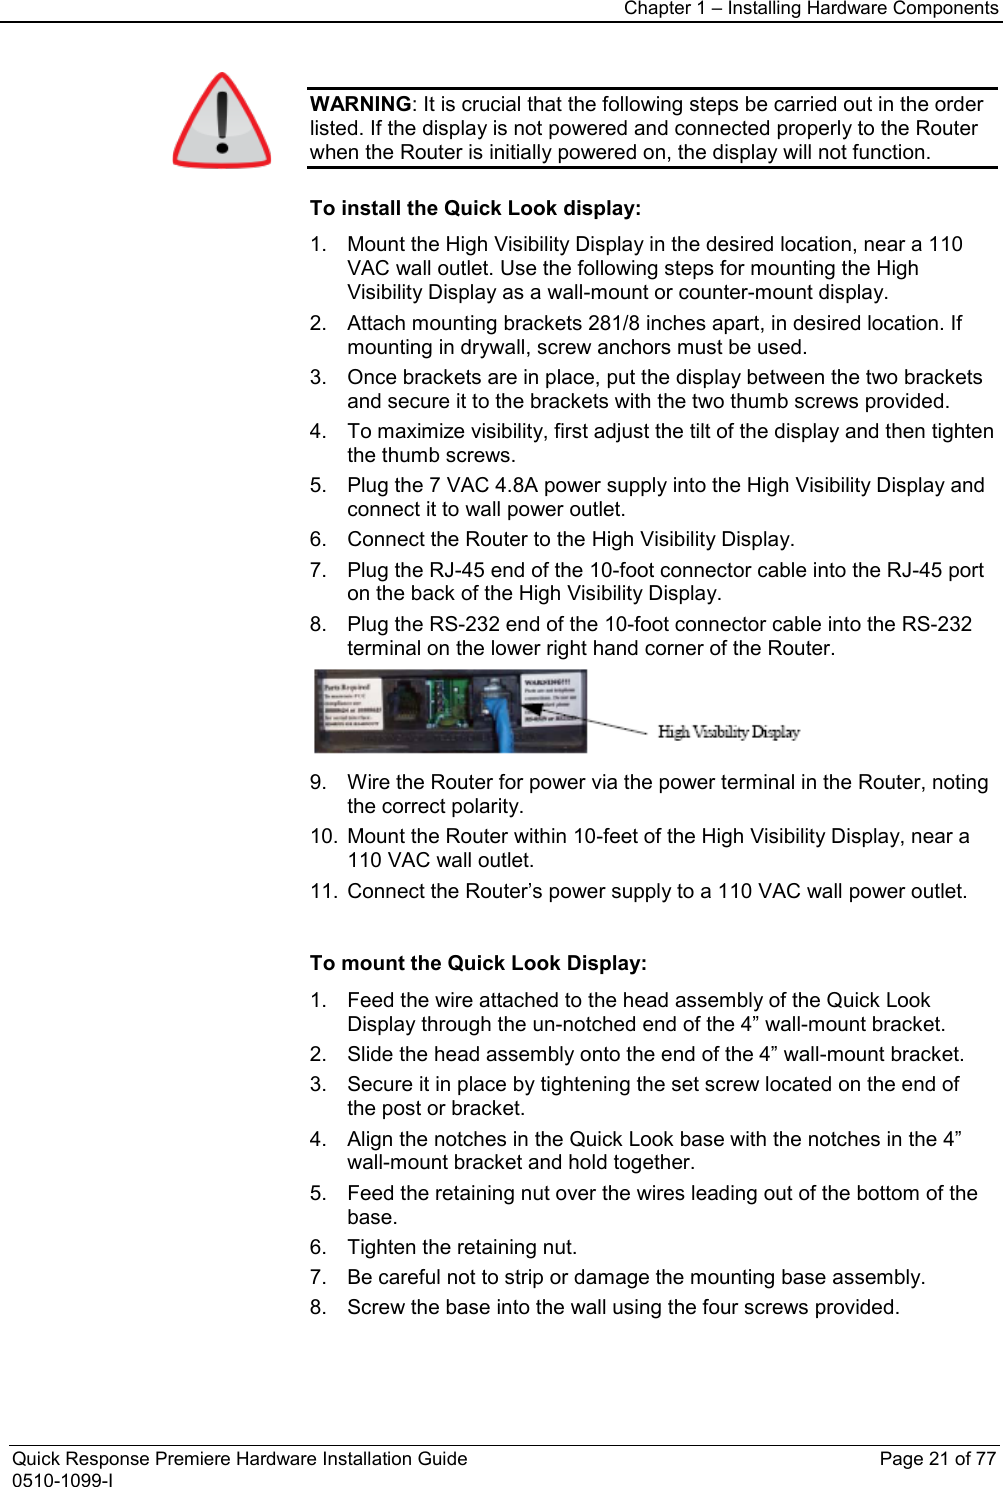 Chapter 1 – Installing Hardware Components  Quick Response Premiere Hardware Installation Guide    Page 21 of 77 0510-1099-I  WARNING: It is crucial that the following steps be carried out in the order listed. If the display is not powered and connected properly to the Router when the Router is initially powered on, the display will not function.  To install the Quick Look display: 1. Mount the High Visibility Display in the desired location, near a 110 VAC wall outlet. Use the following steps for mounting the High Visibility Display as a wall-mount or counter-mount display. 2. Attach mounting brackets 281/8 inches apart, in desired location. If mounting in drywall, screw anchors must be used. 3. Once brackets are in place, put the display between the two brackets and secure it to the brackets with the two thumb screws provided. 4. To maximize visibility, first adjust the tilt of the display and then tighten the thumb screws. 5. Plug the 7 VAC 4.8A power supply into the High Visibility Display and connect it to wall power outlet. 6. Connect the Router to the High Visibility Display.  7. Plug the RJ-45 end of the 10-foot connector cable into the RJ-45 port on the back of the High Visibility Display. 8. Plug the RS-232 end of the 10-foot connector cable into the RS-232 terminal on the lower right hand corner of the Router.   9. Wire the Router for power via the power terminal in the Router, noting the correct polarity.  10. Mount the Router within 10-feet of the High Visibility Display, near a 110 VAC wall outlet. 11. Connect the Router’s power supply to a 110 VAC wall power outlet.   To mount the Quick Look Display: 1. Feed the wire attached to the head assembly of the Quick Look Display through the un-notched end of the 4” wall-mount bracket. 2. Slide the head assembly onto the end of the 4” wall-mount bracket.  3. Secure it in place by tightening the set screw located on the end of the post or bracket. 4. Align the notches in the Quick Look base with the notches in the 4” wall-mount bracket and hold together. 5. Feed the retaining nut over the wires leading out of the bottom of the base. 6. Tighten the retaining nut.  7. Be careful not to strip or damage the mounting base assembly. 8. Screw the base into the wall using the four screws provided. 